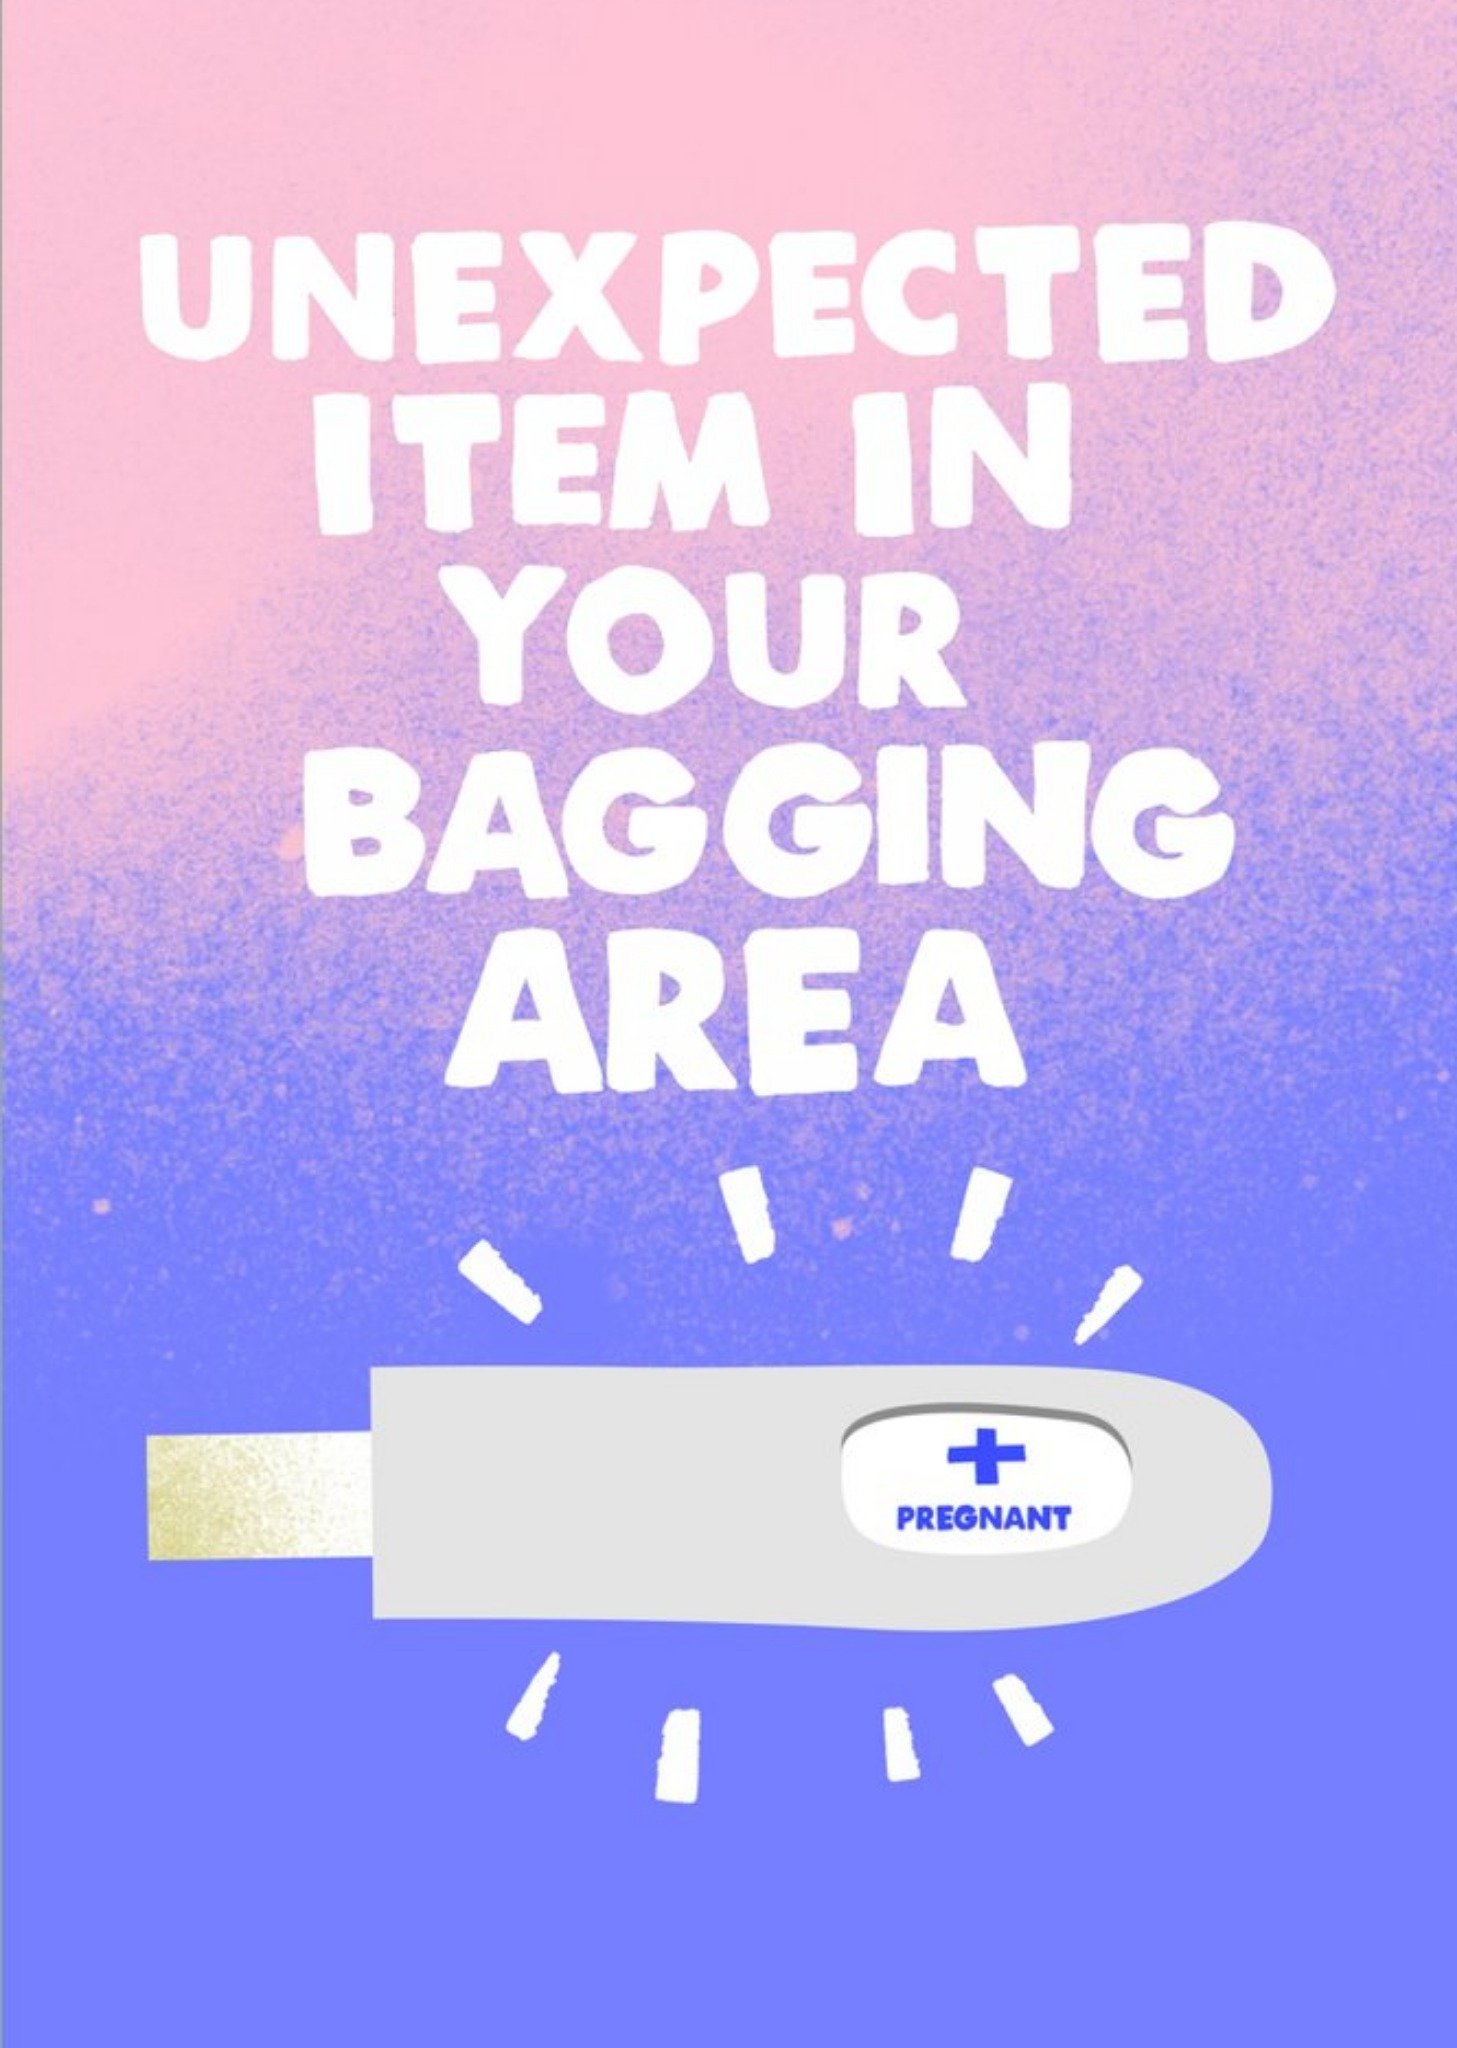 Jolly Awesome Unexpected Item In Your Bagging Area Pregnancy Card, Large